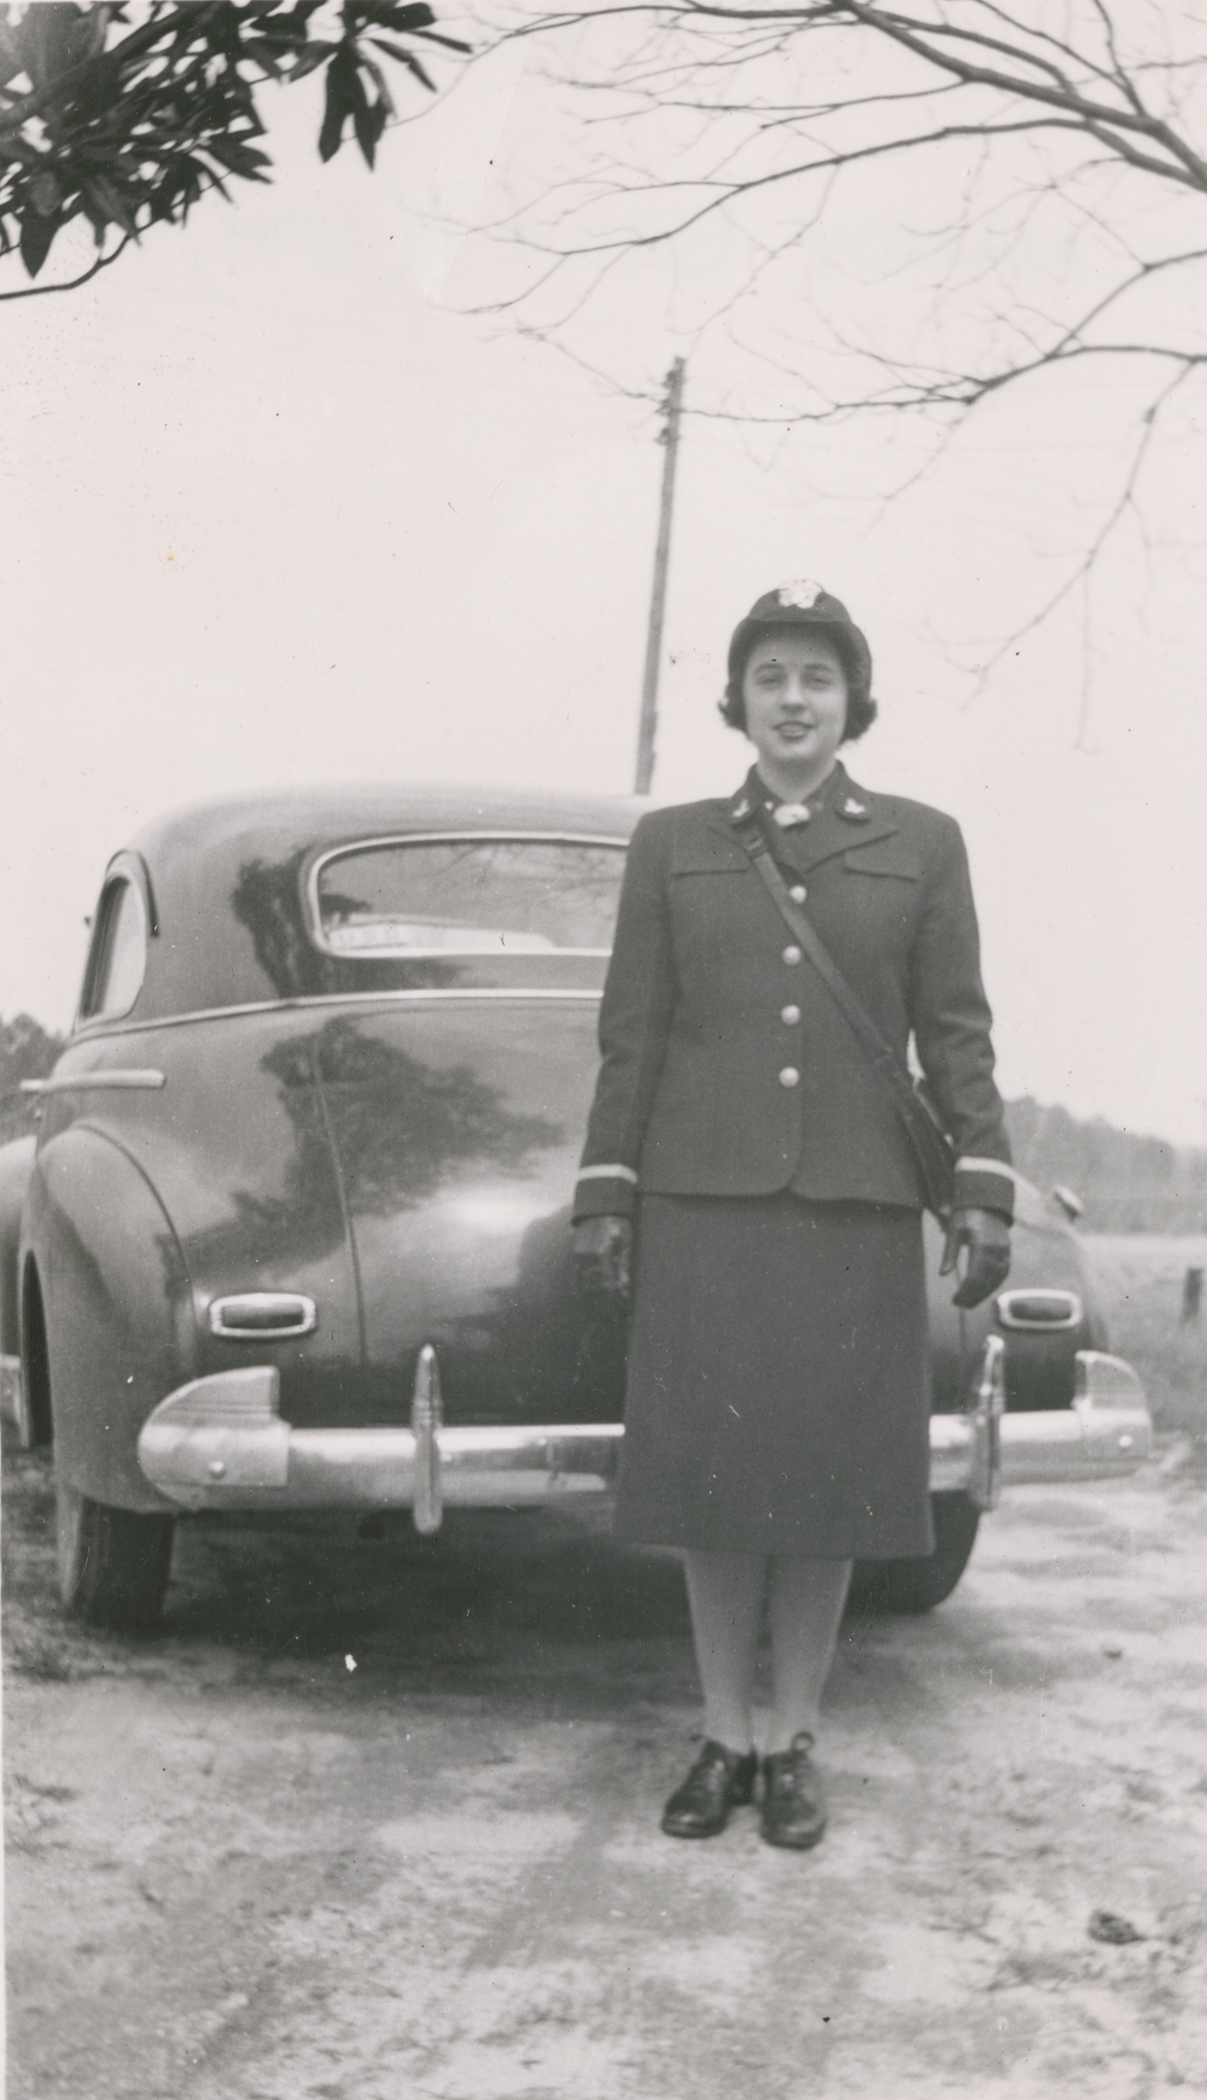 A black and white photograph of Nancy Bailey Cogsdale in her WAVES uniform standing in front of a car